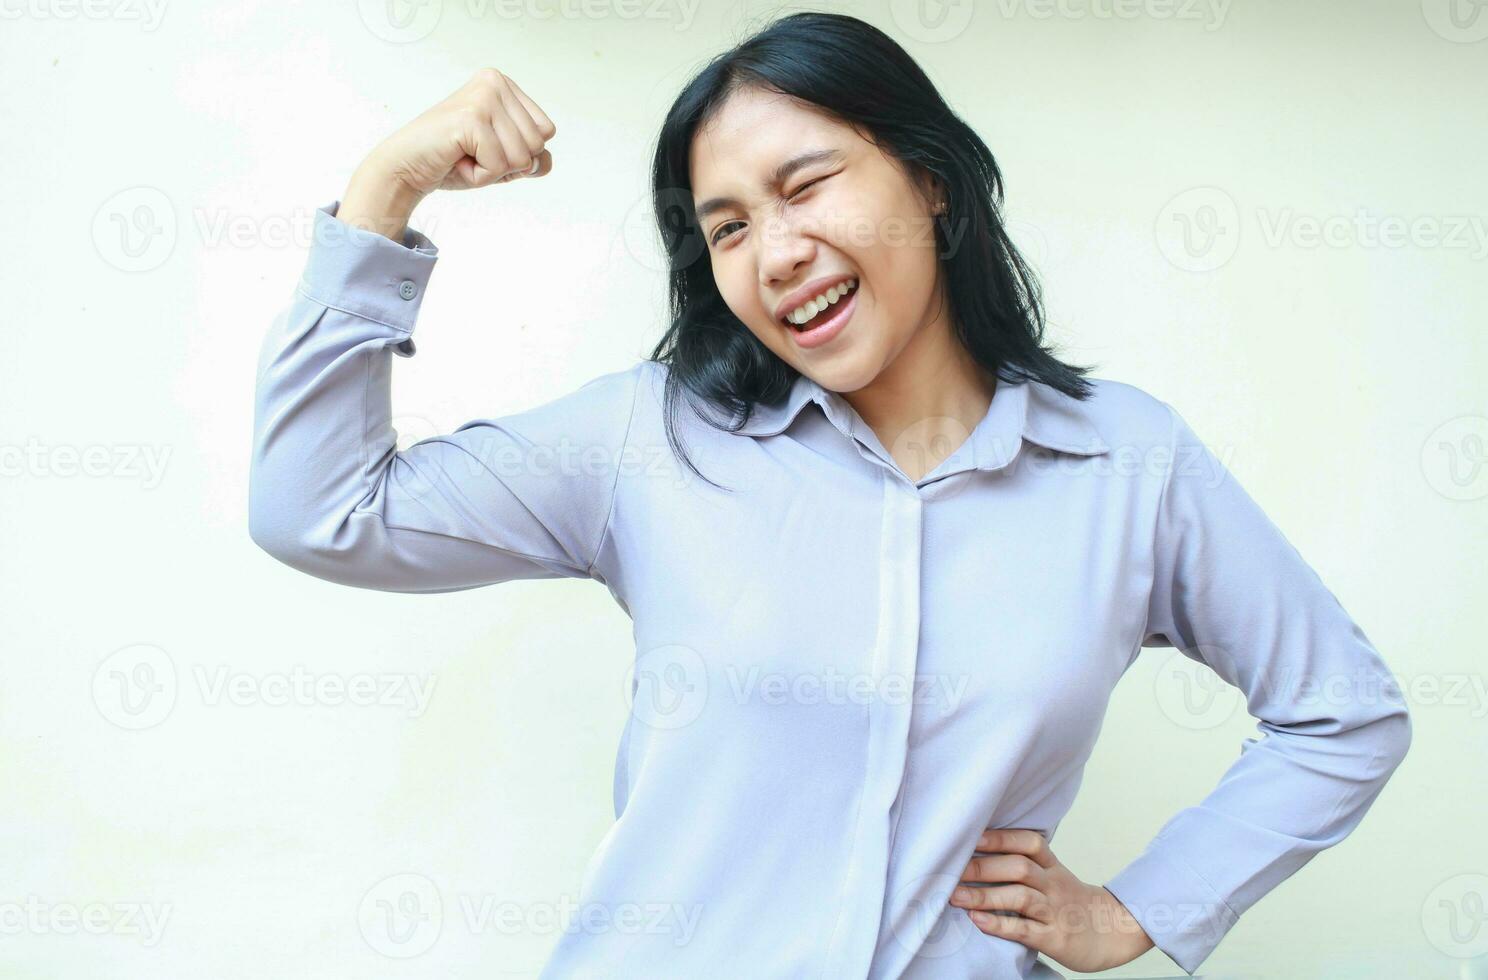 carefree powerful asian young business woman raising arm excited showing biceps strenght with hands on waist, blink eye flirting, wearing formal shirt standing over white background, looking at camera photo